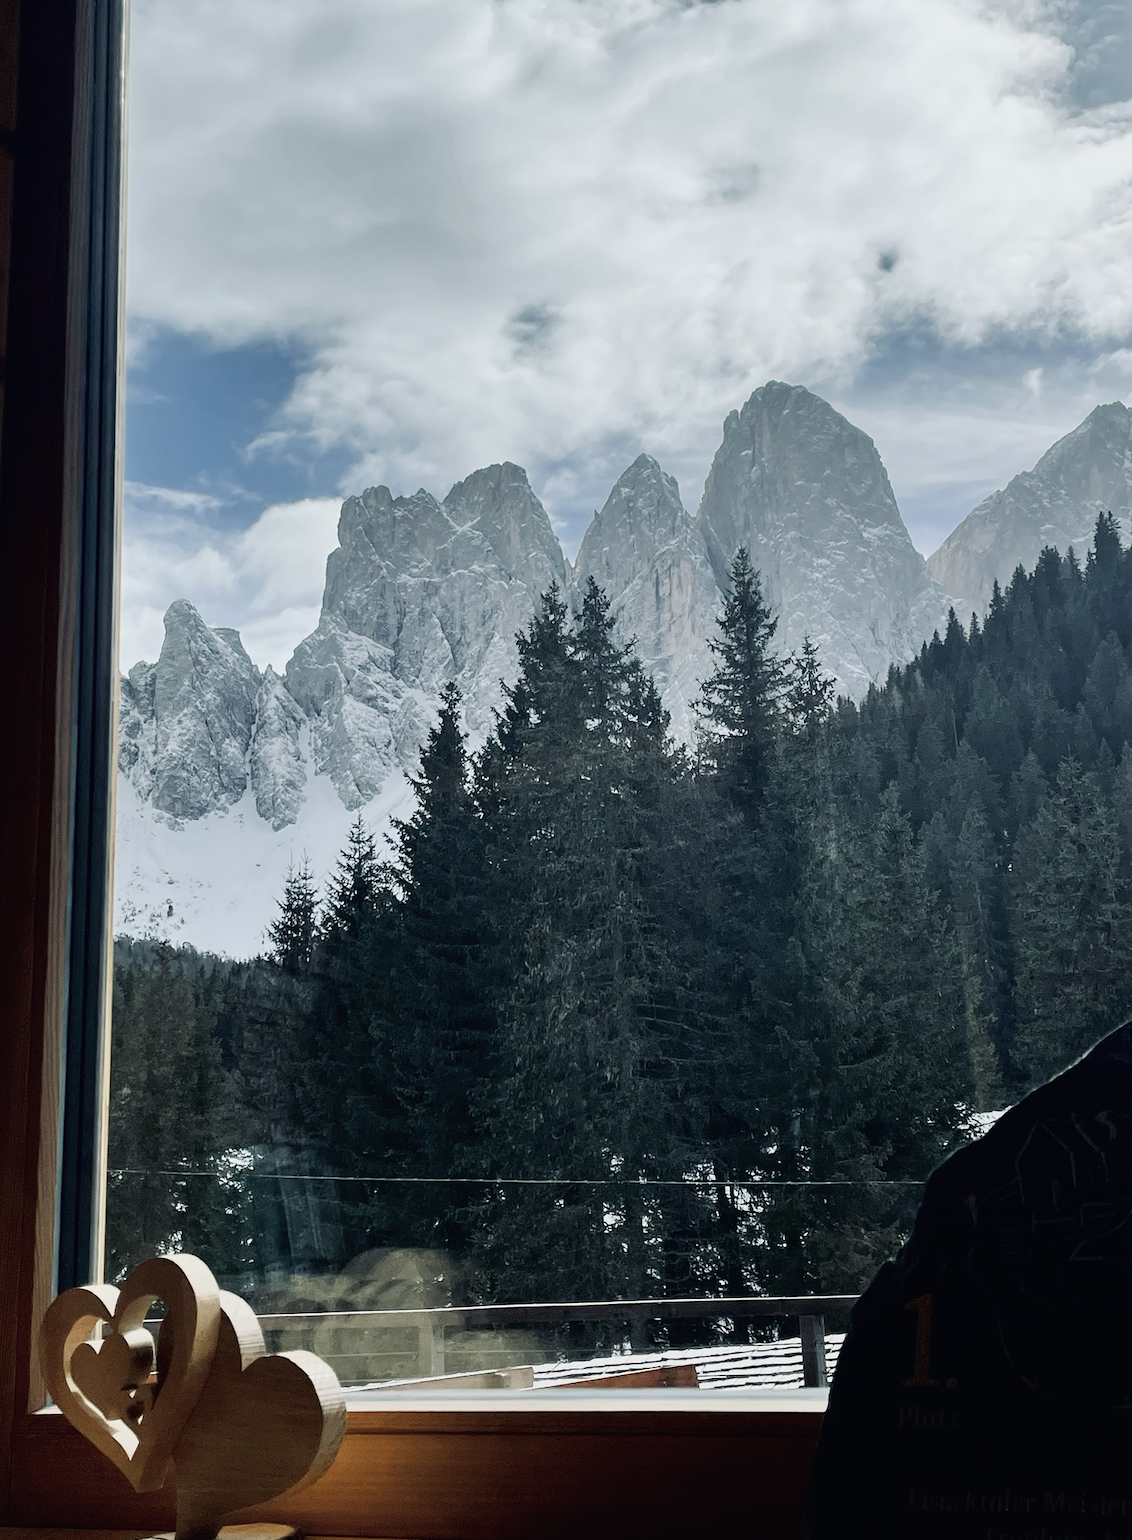 Seceda mountains in the Dolomites through a restaurant window